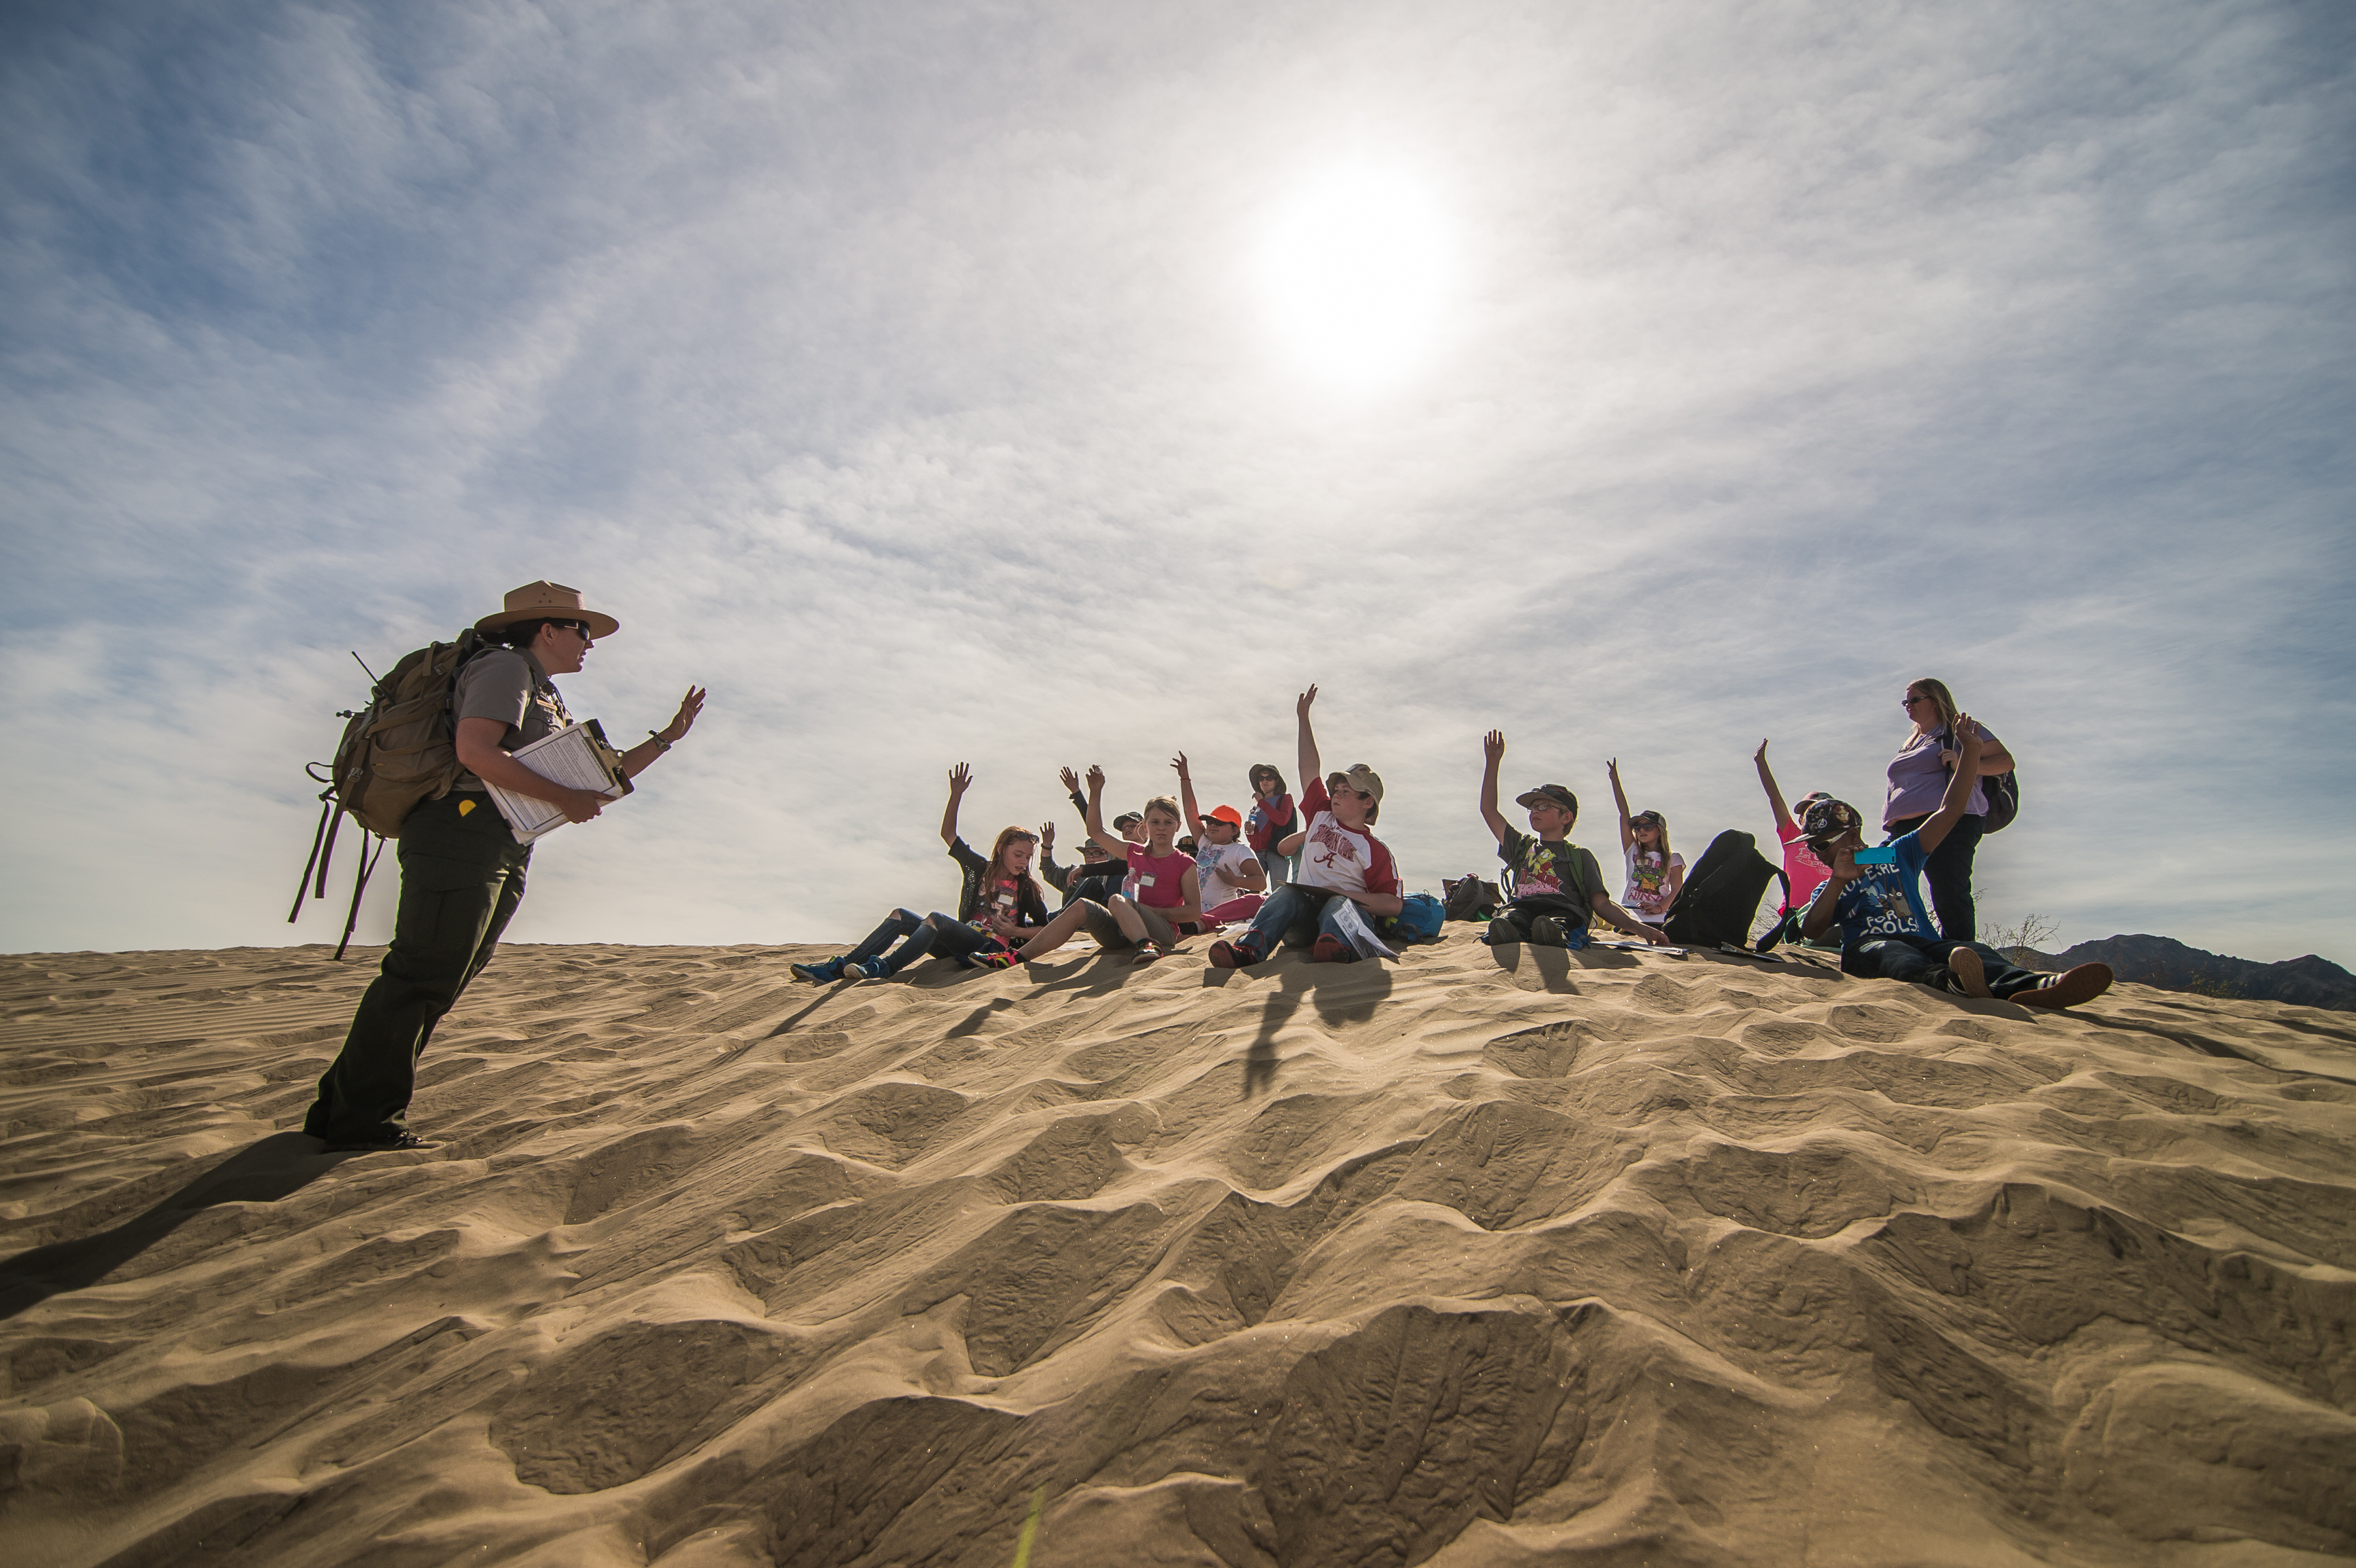 Students sit in front of a ranger on the sand dunes.